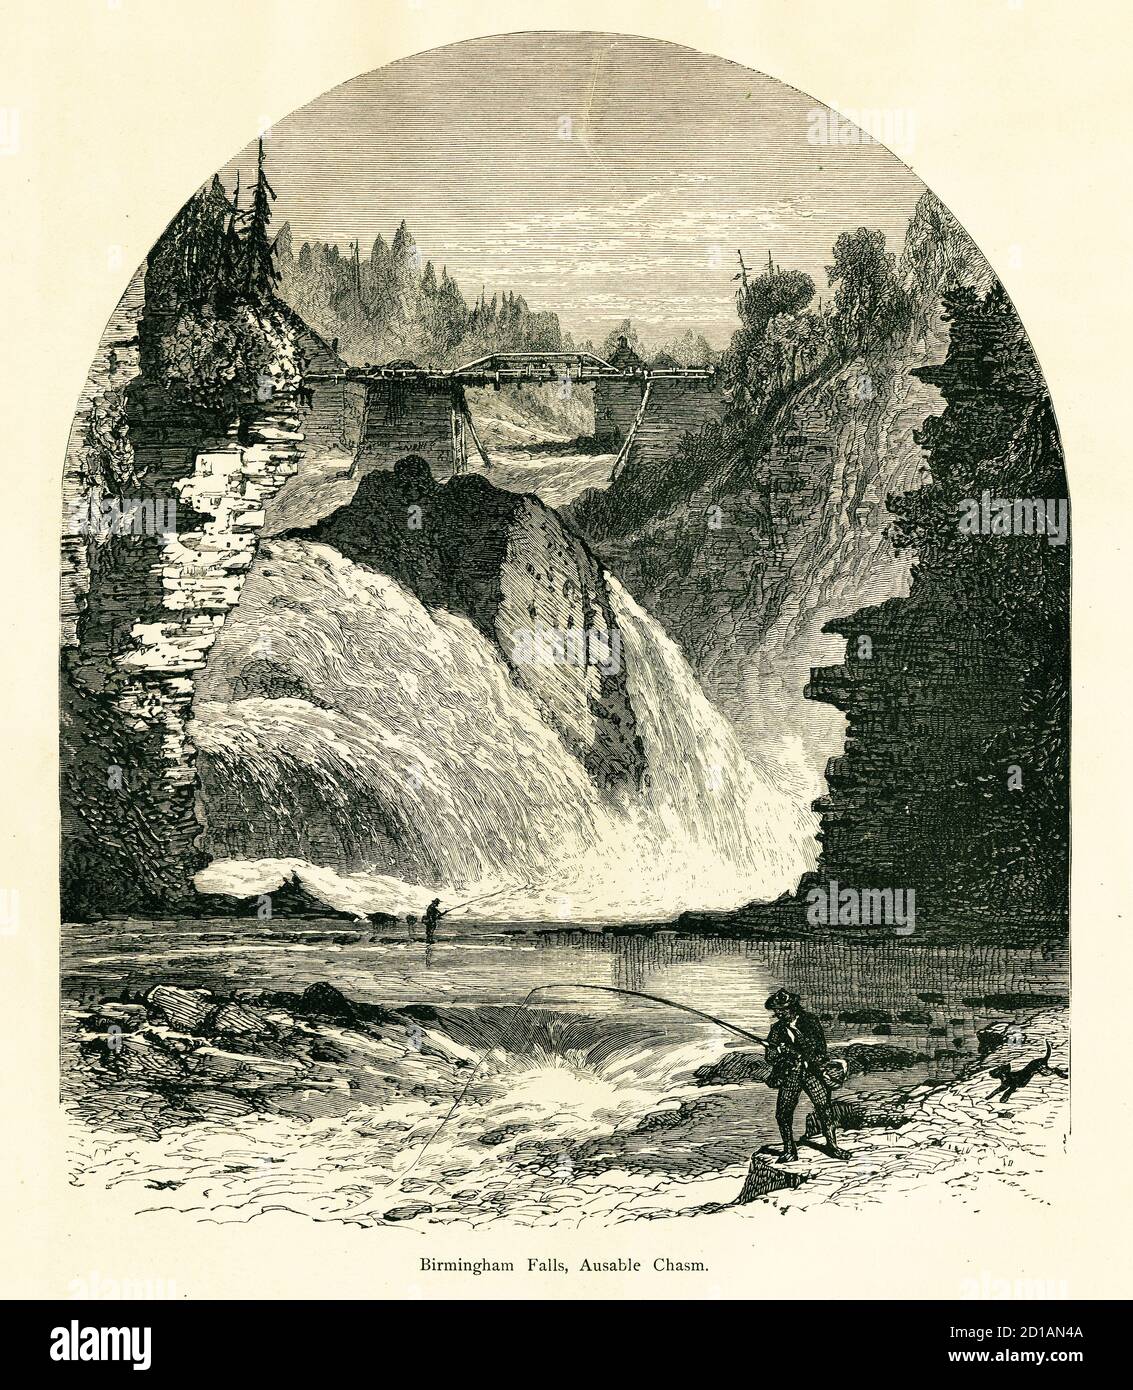 Antique illustration of Birmingham Falls, Ausable Chasm, located near Keeseville, New York, USA. Engraving published in Picturesque America or the Lan Stock Photo